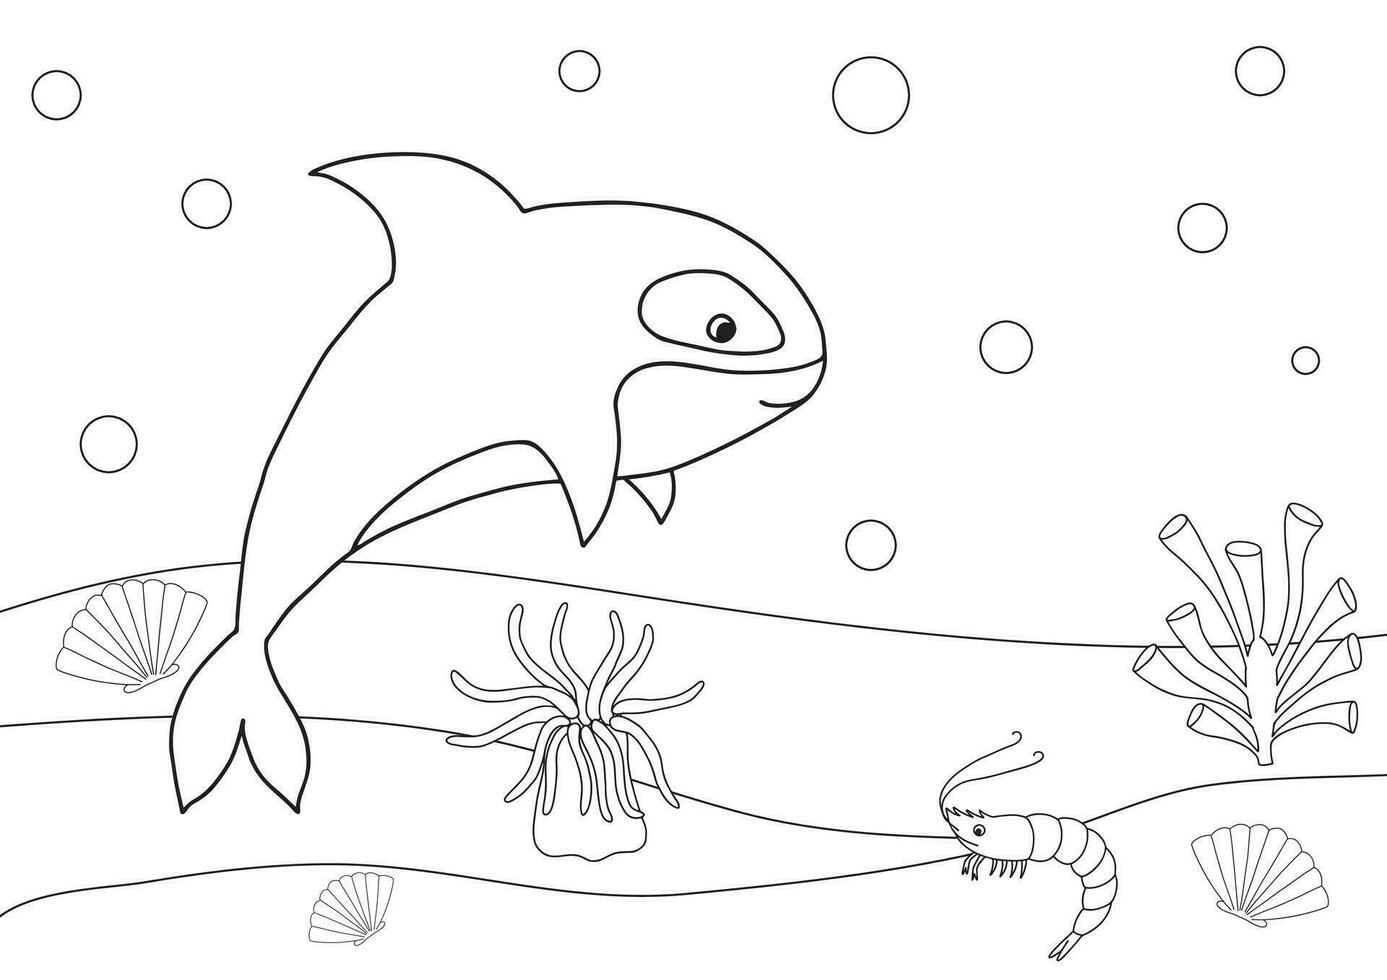 Cute cartoon killer whale. Coloring book or page for kids. Marine life vector